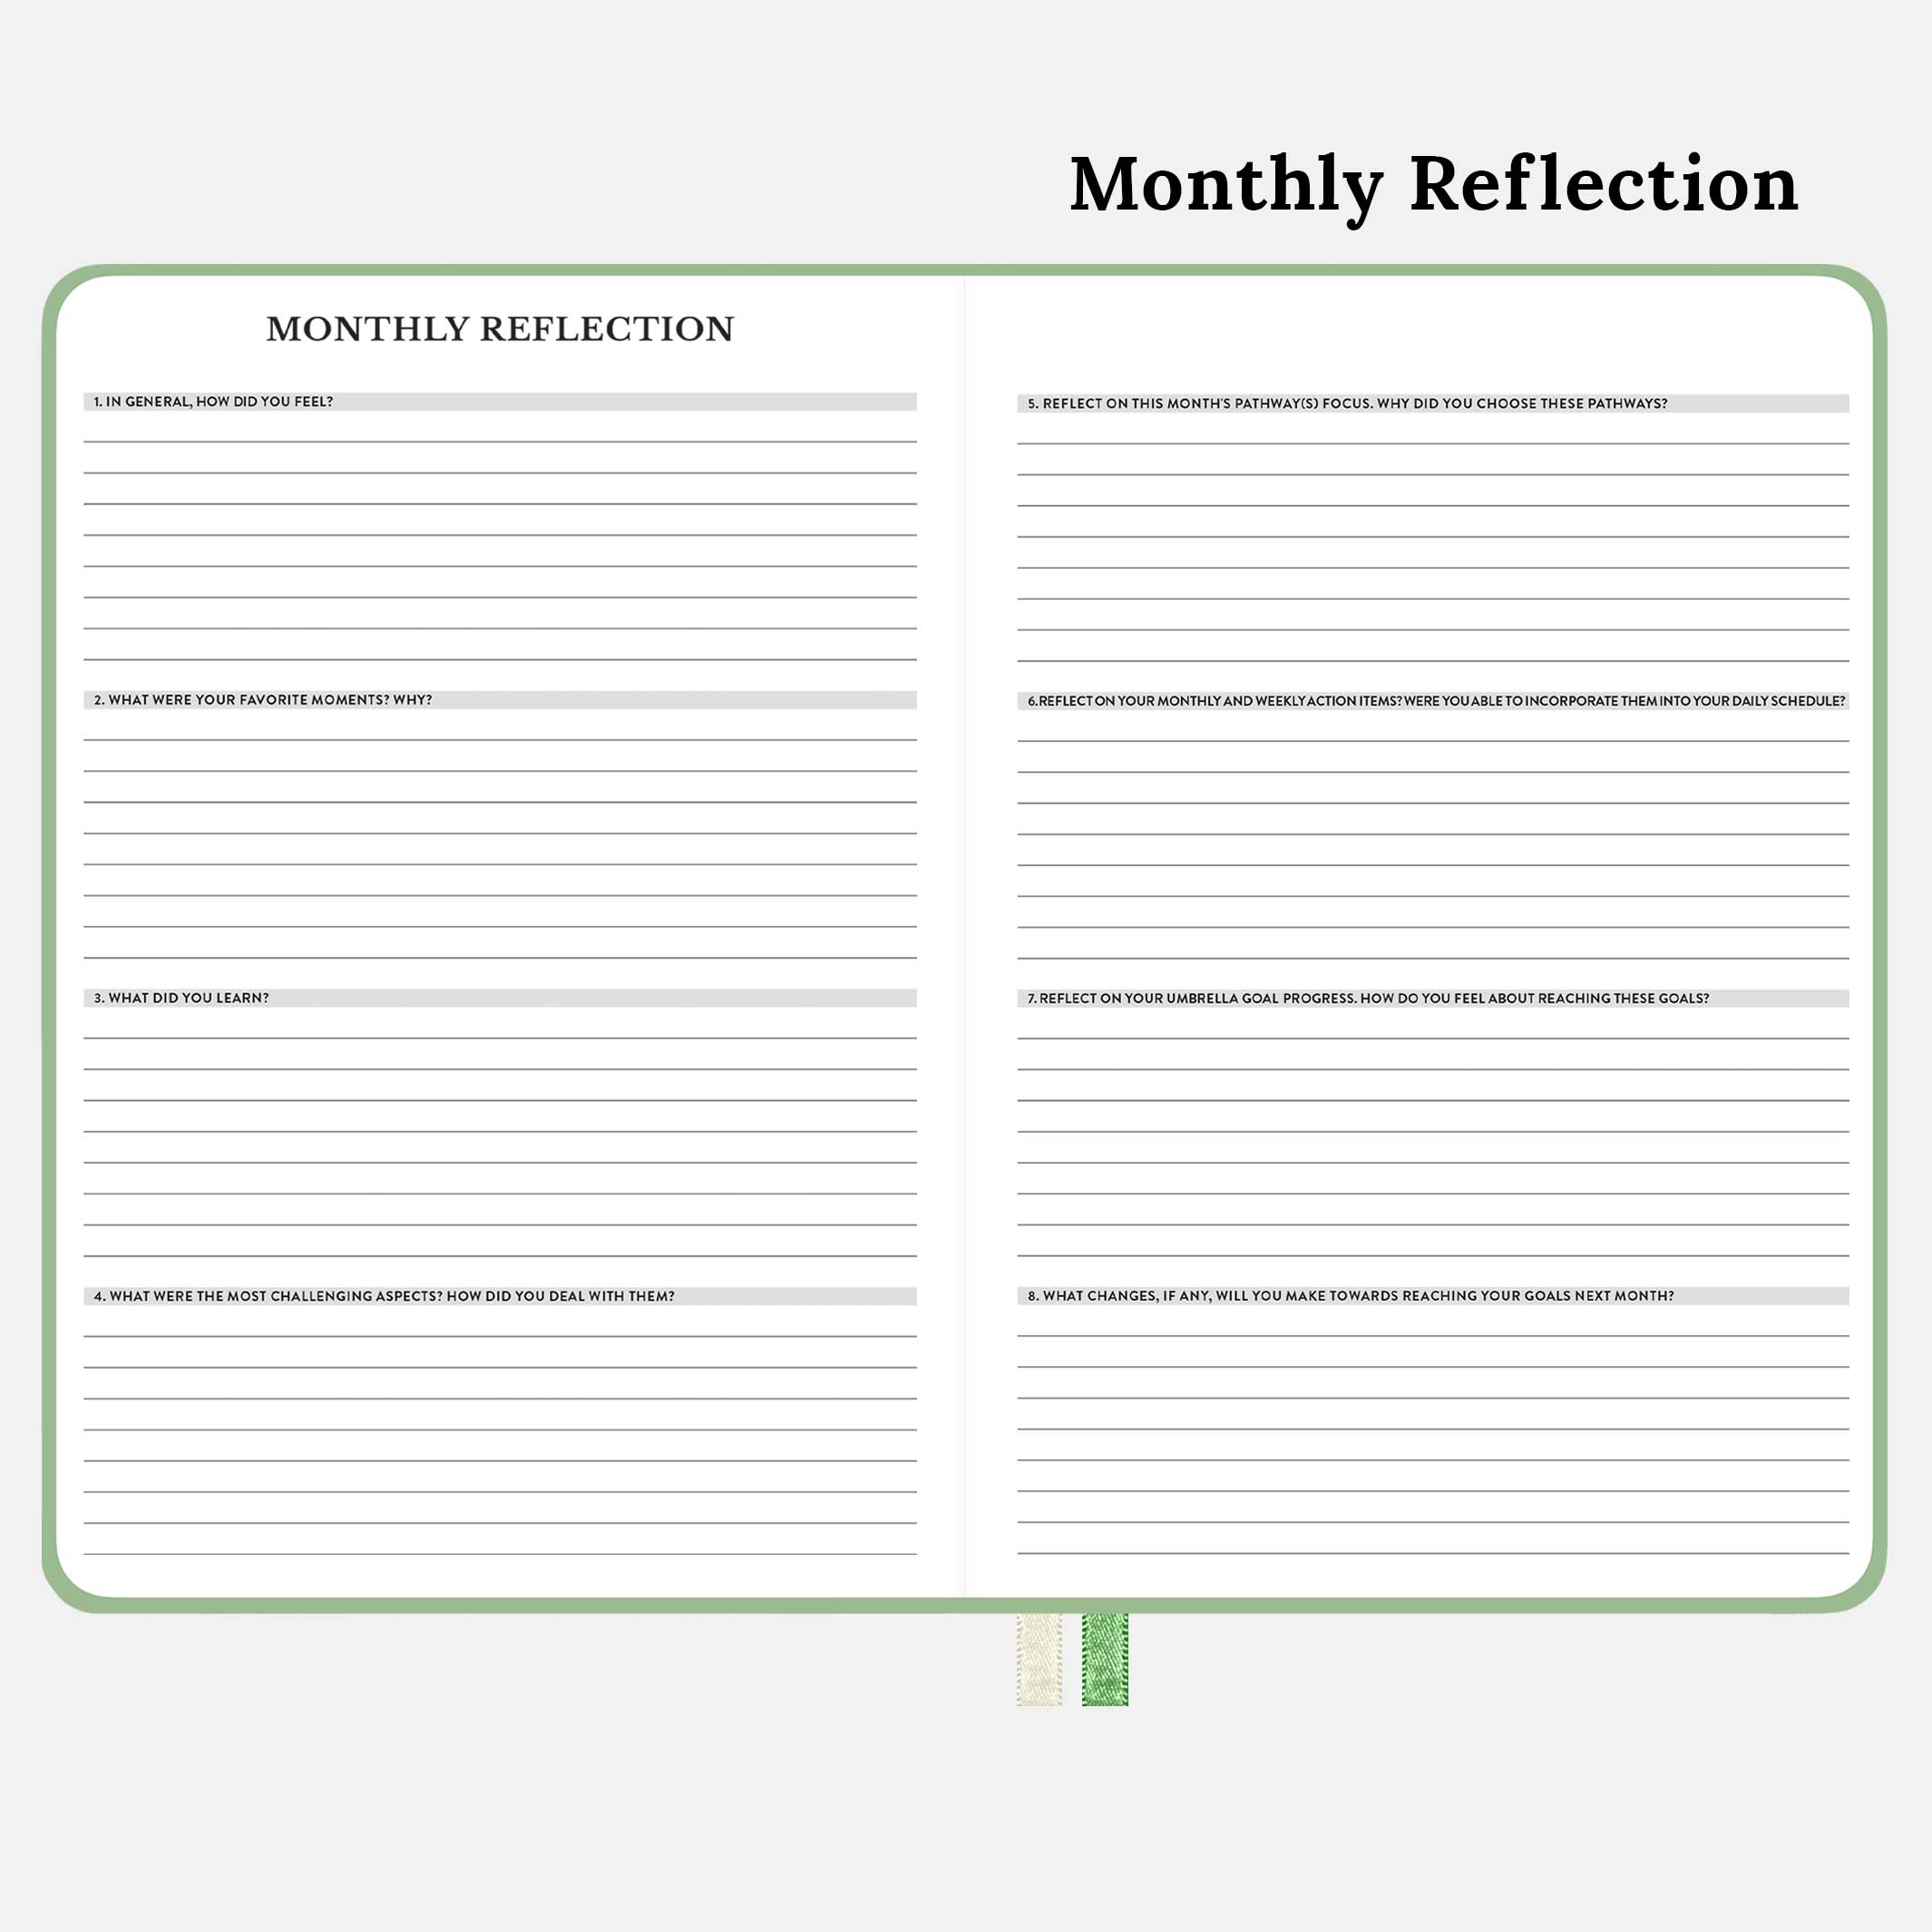 The monthly reflection of the green 12-month undated monthly & weekly planner. Reflect on the month and adjust your umbrella goals as needed. #color_courageous-green